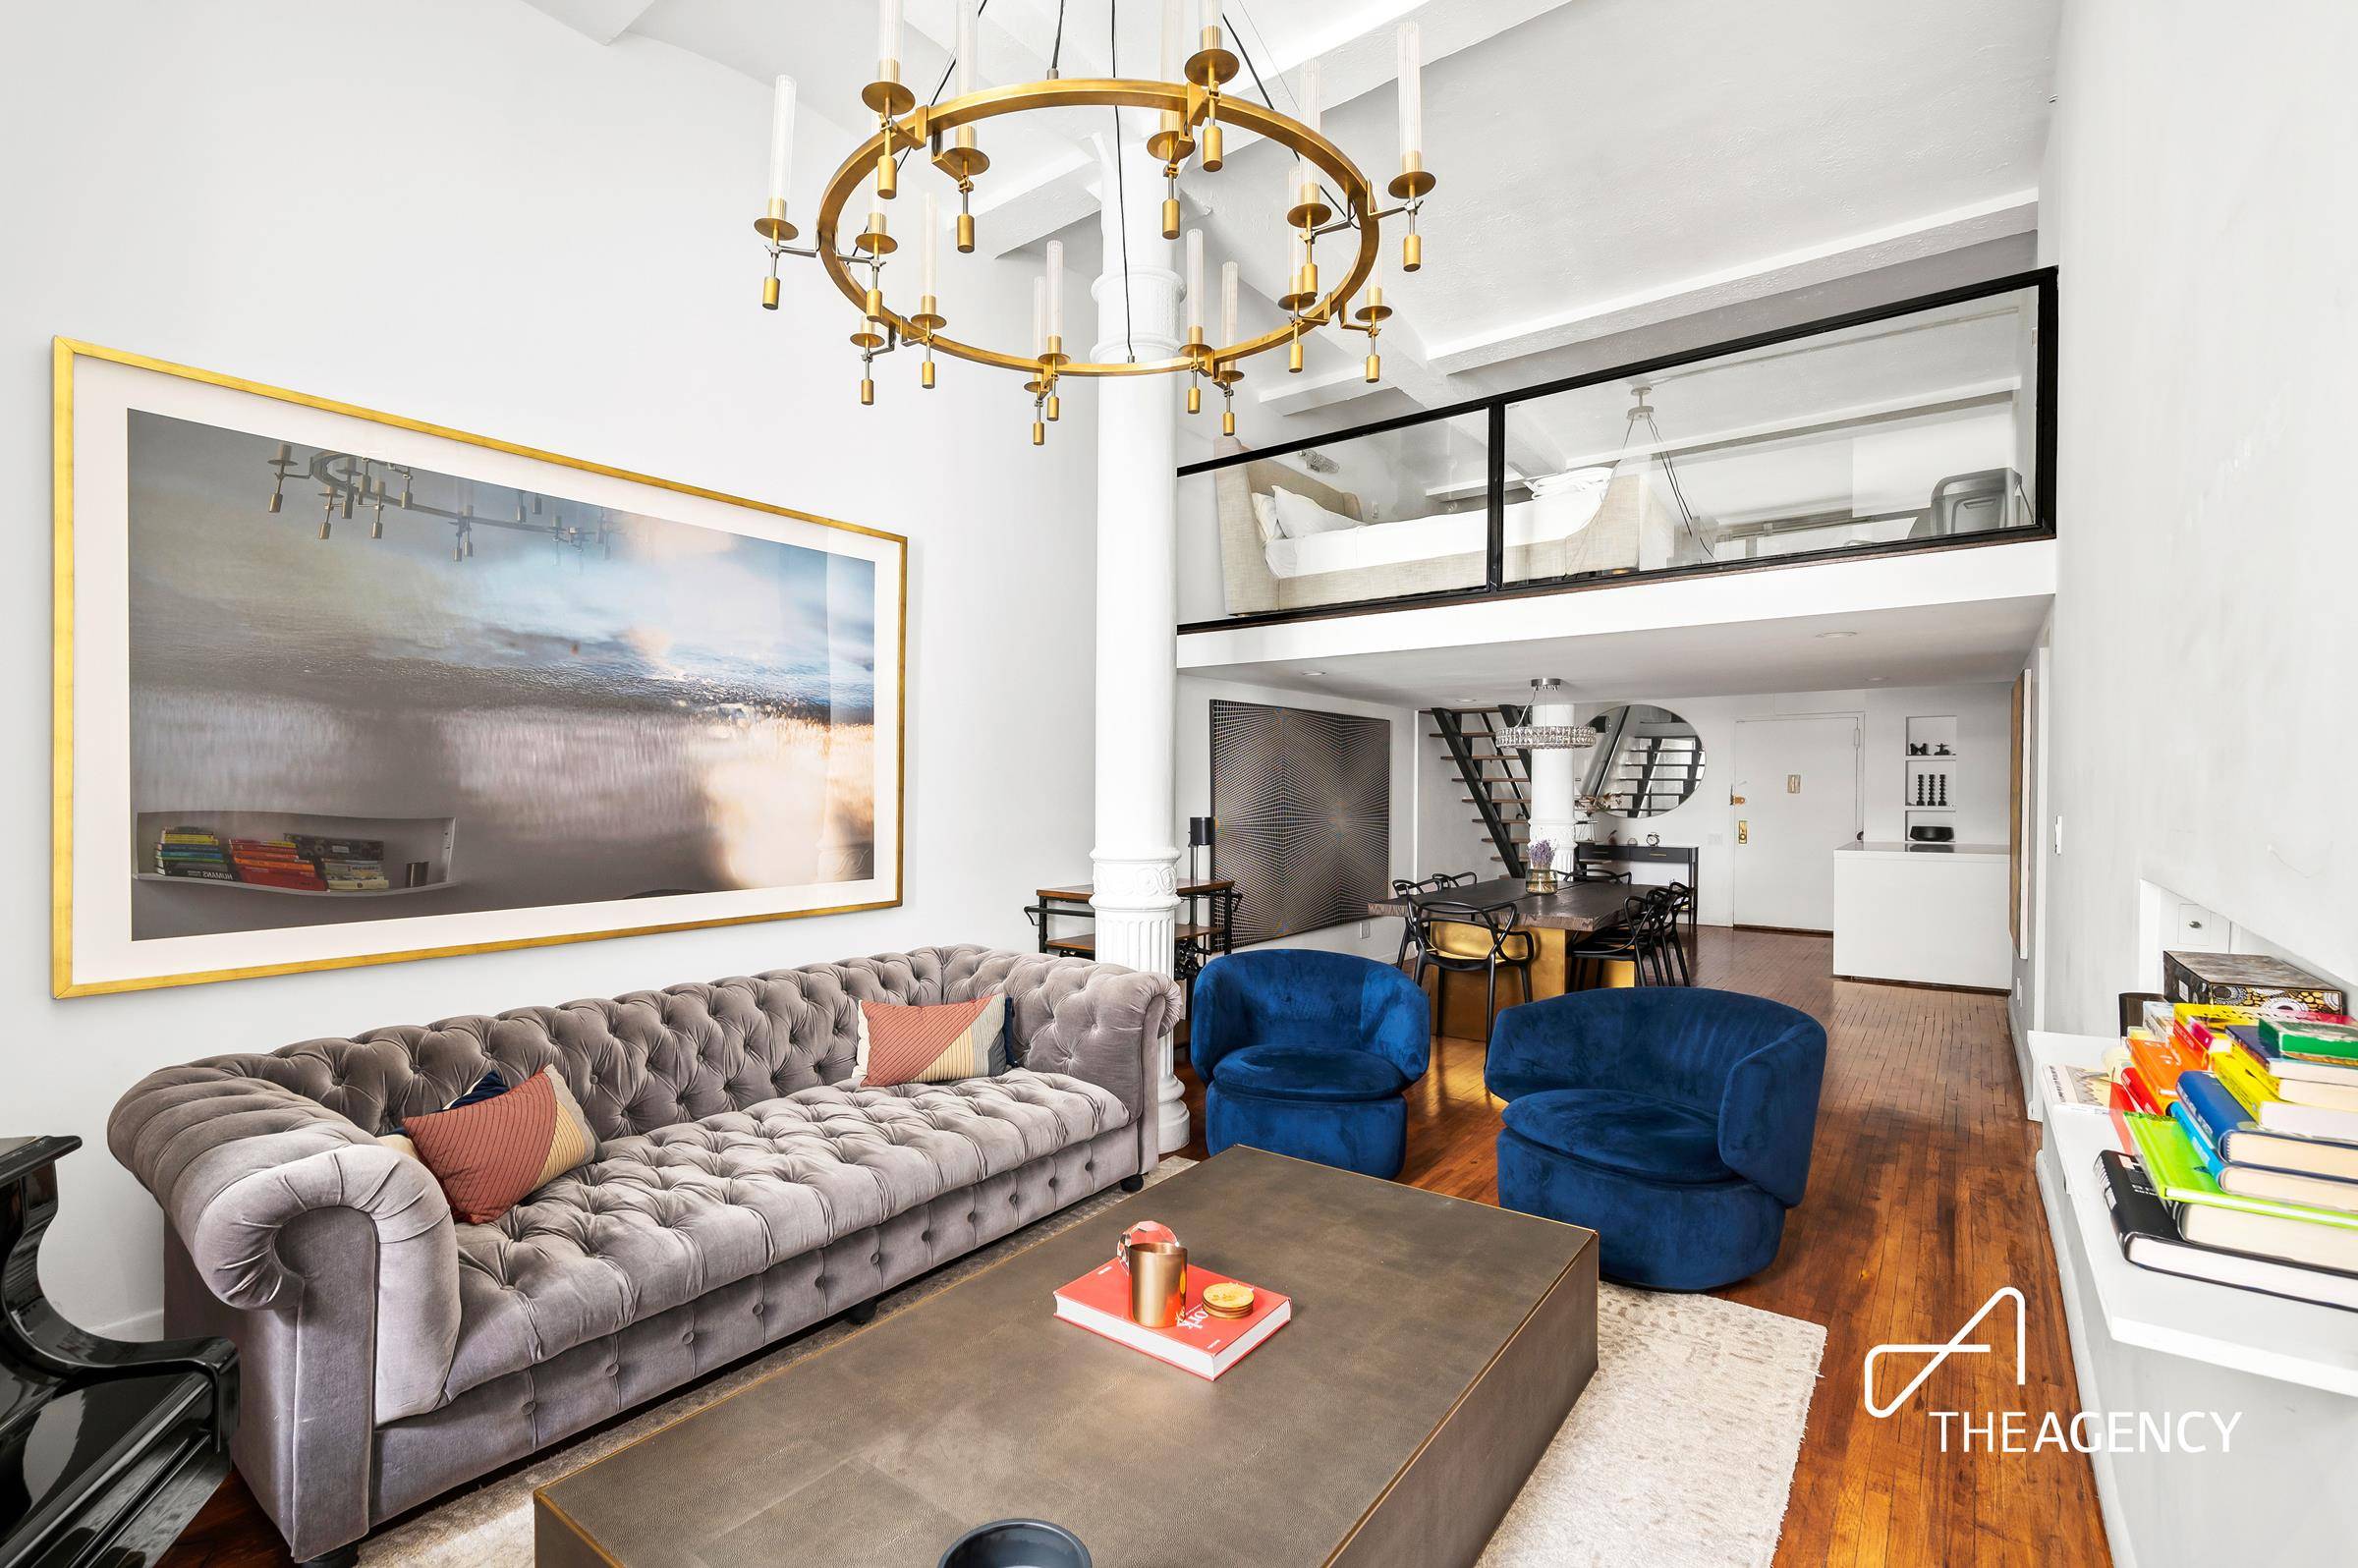 This expansive renovated Greenwich Village loft is now available featuring 13.